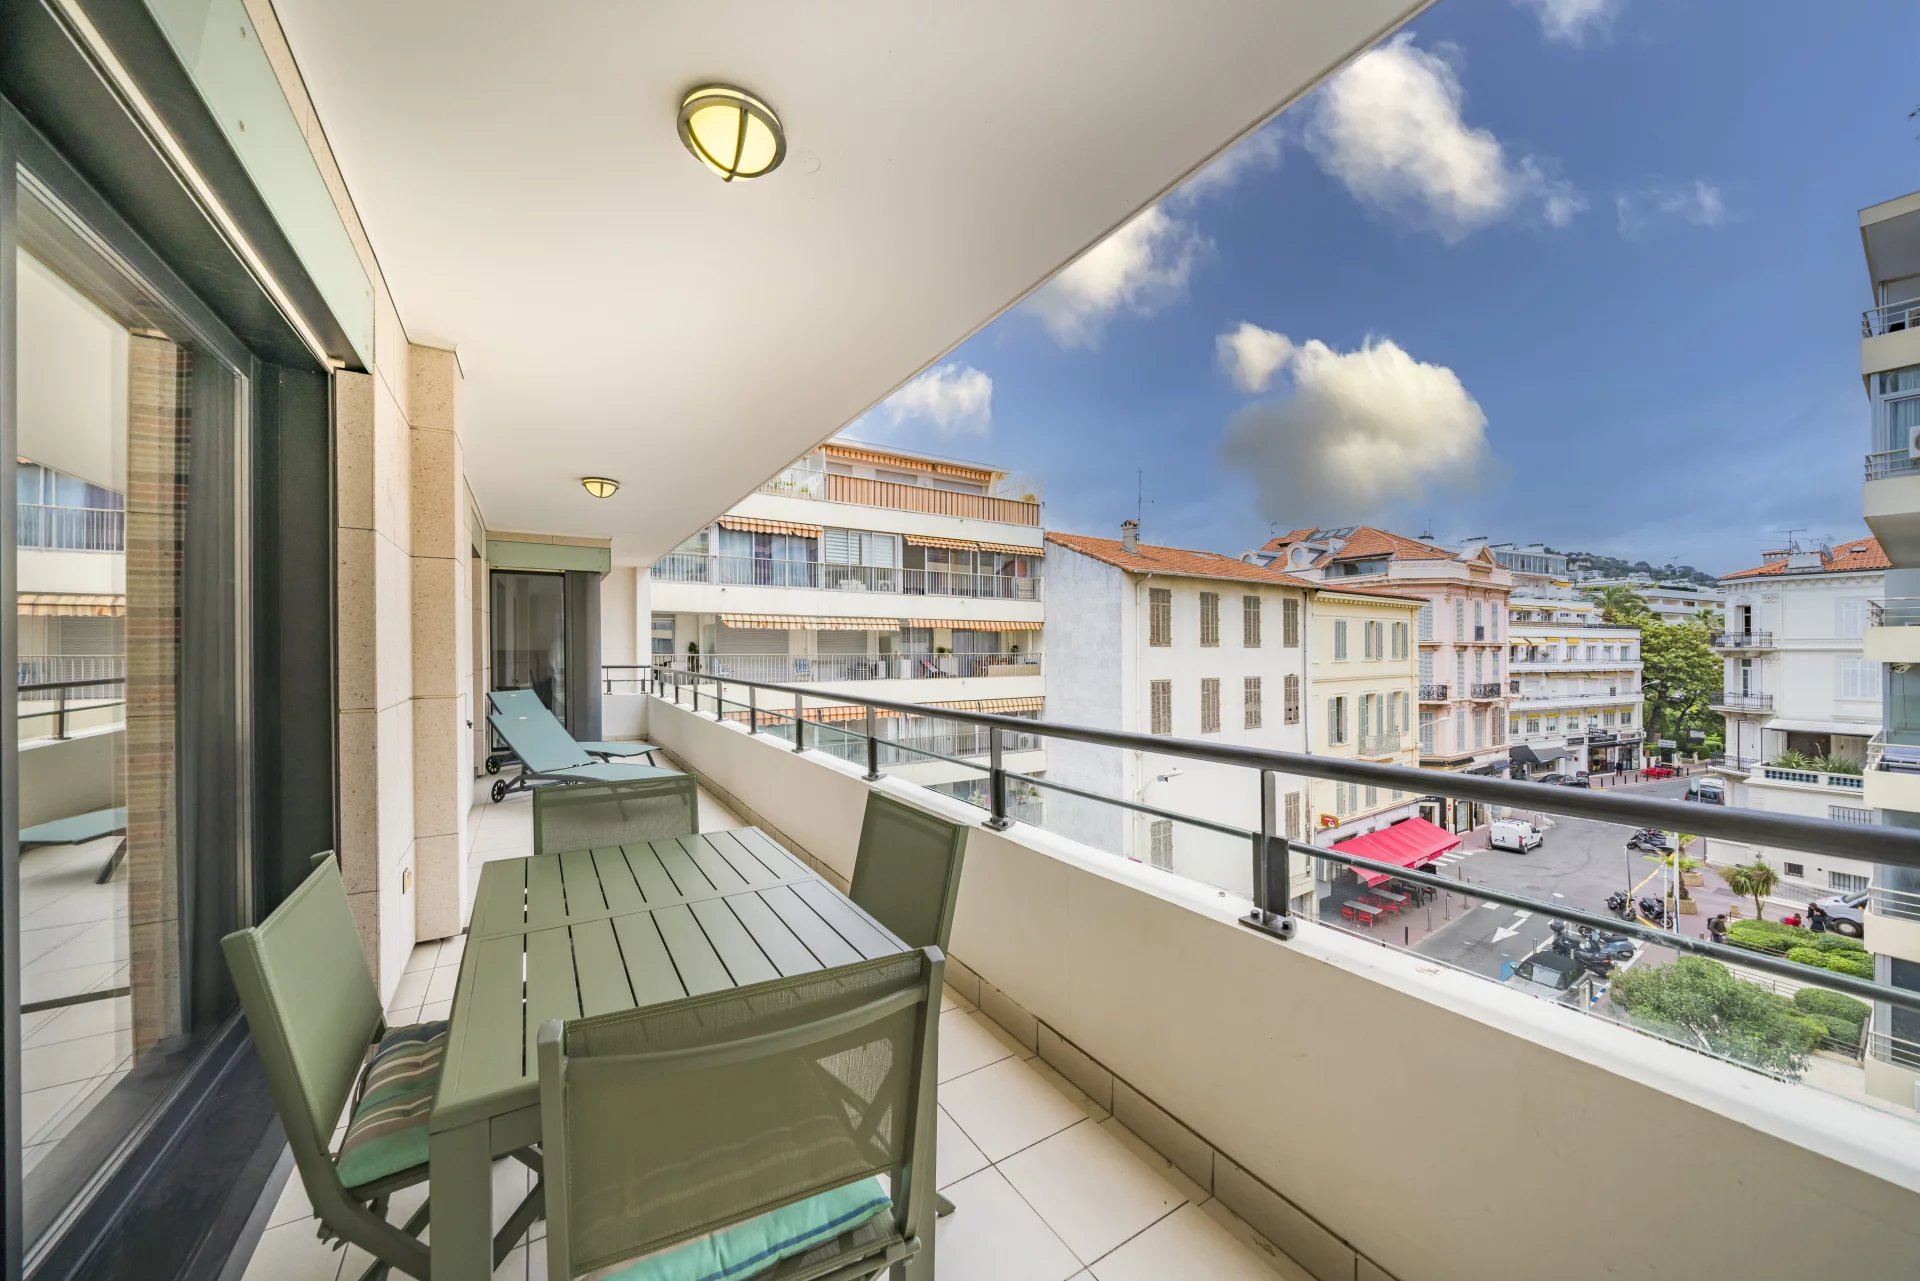 Rental apartment Cannes center next to Croisette and convention center